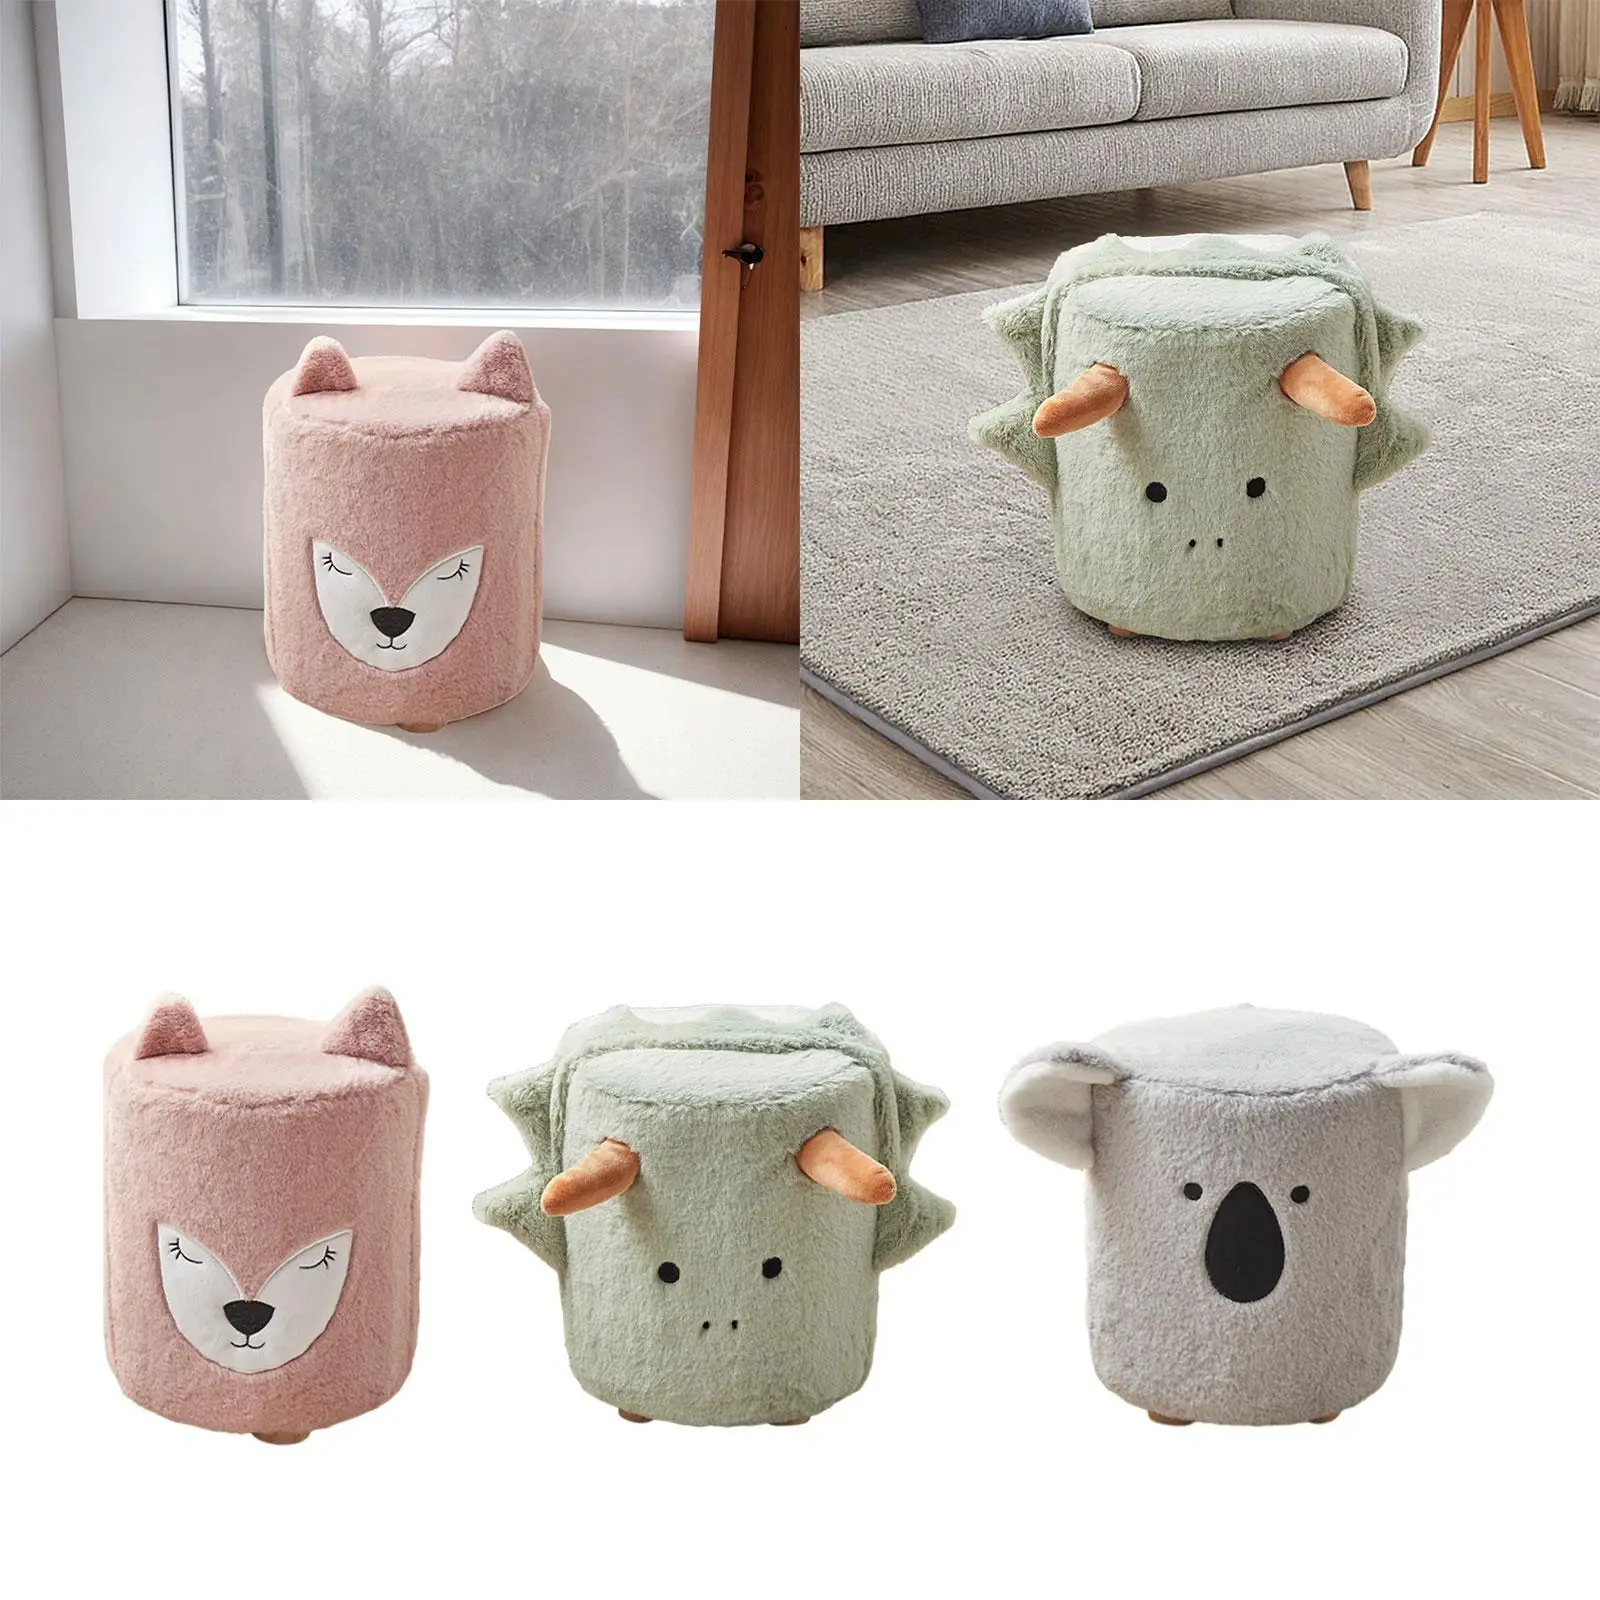 Lovely Foot Rest Stool with Removable and Washable Cover Compact Ottoman Stool for Bedside Entryway Sturdy Room Nursery Doorway